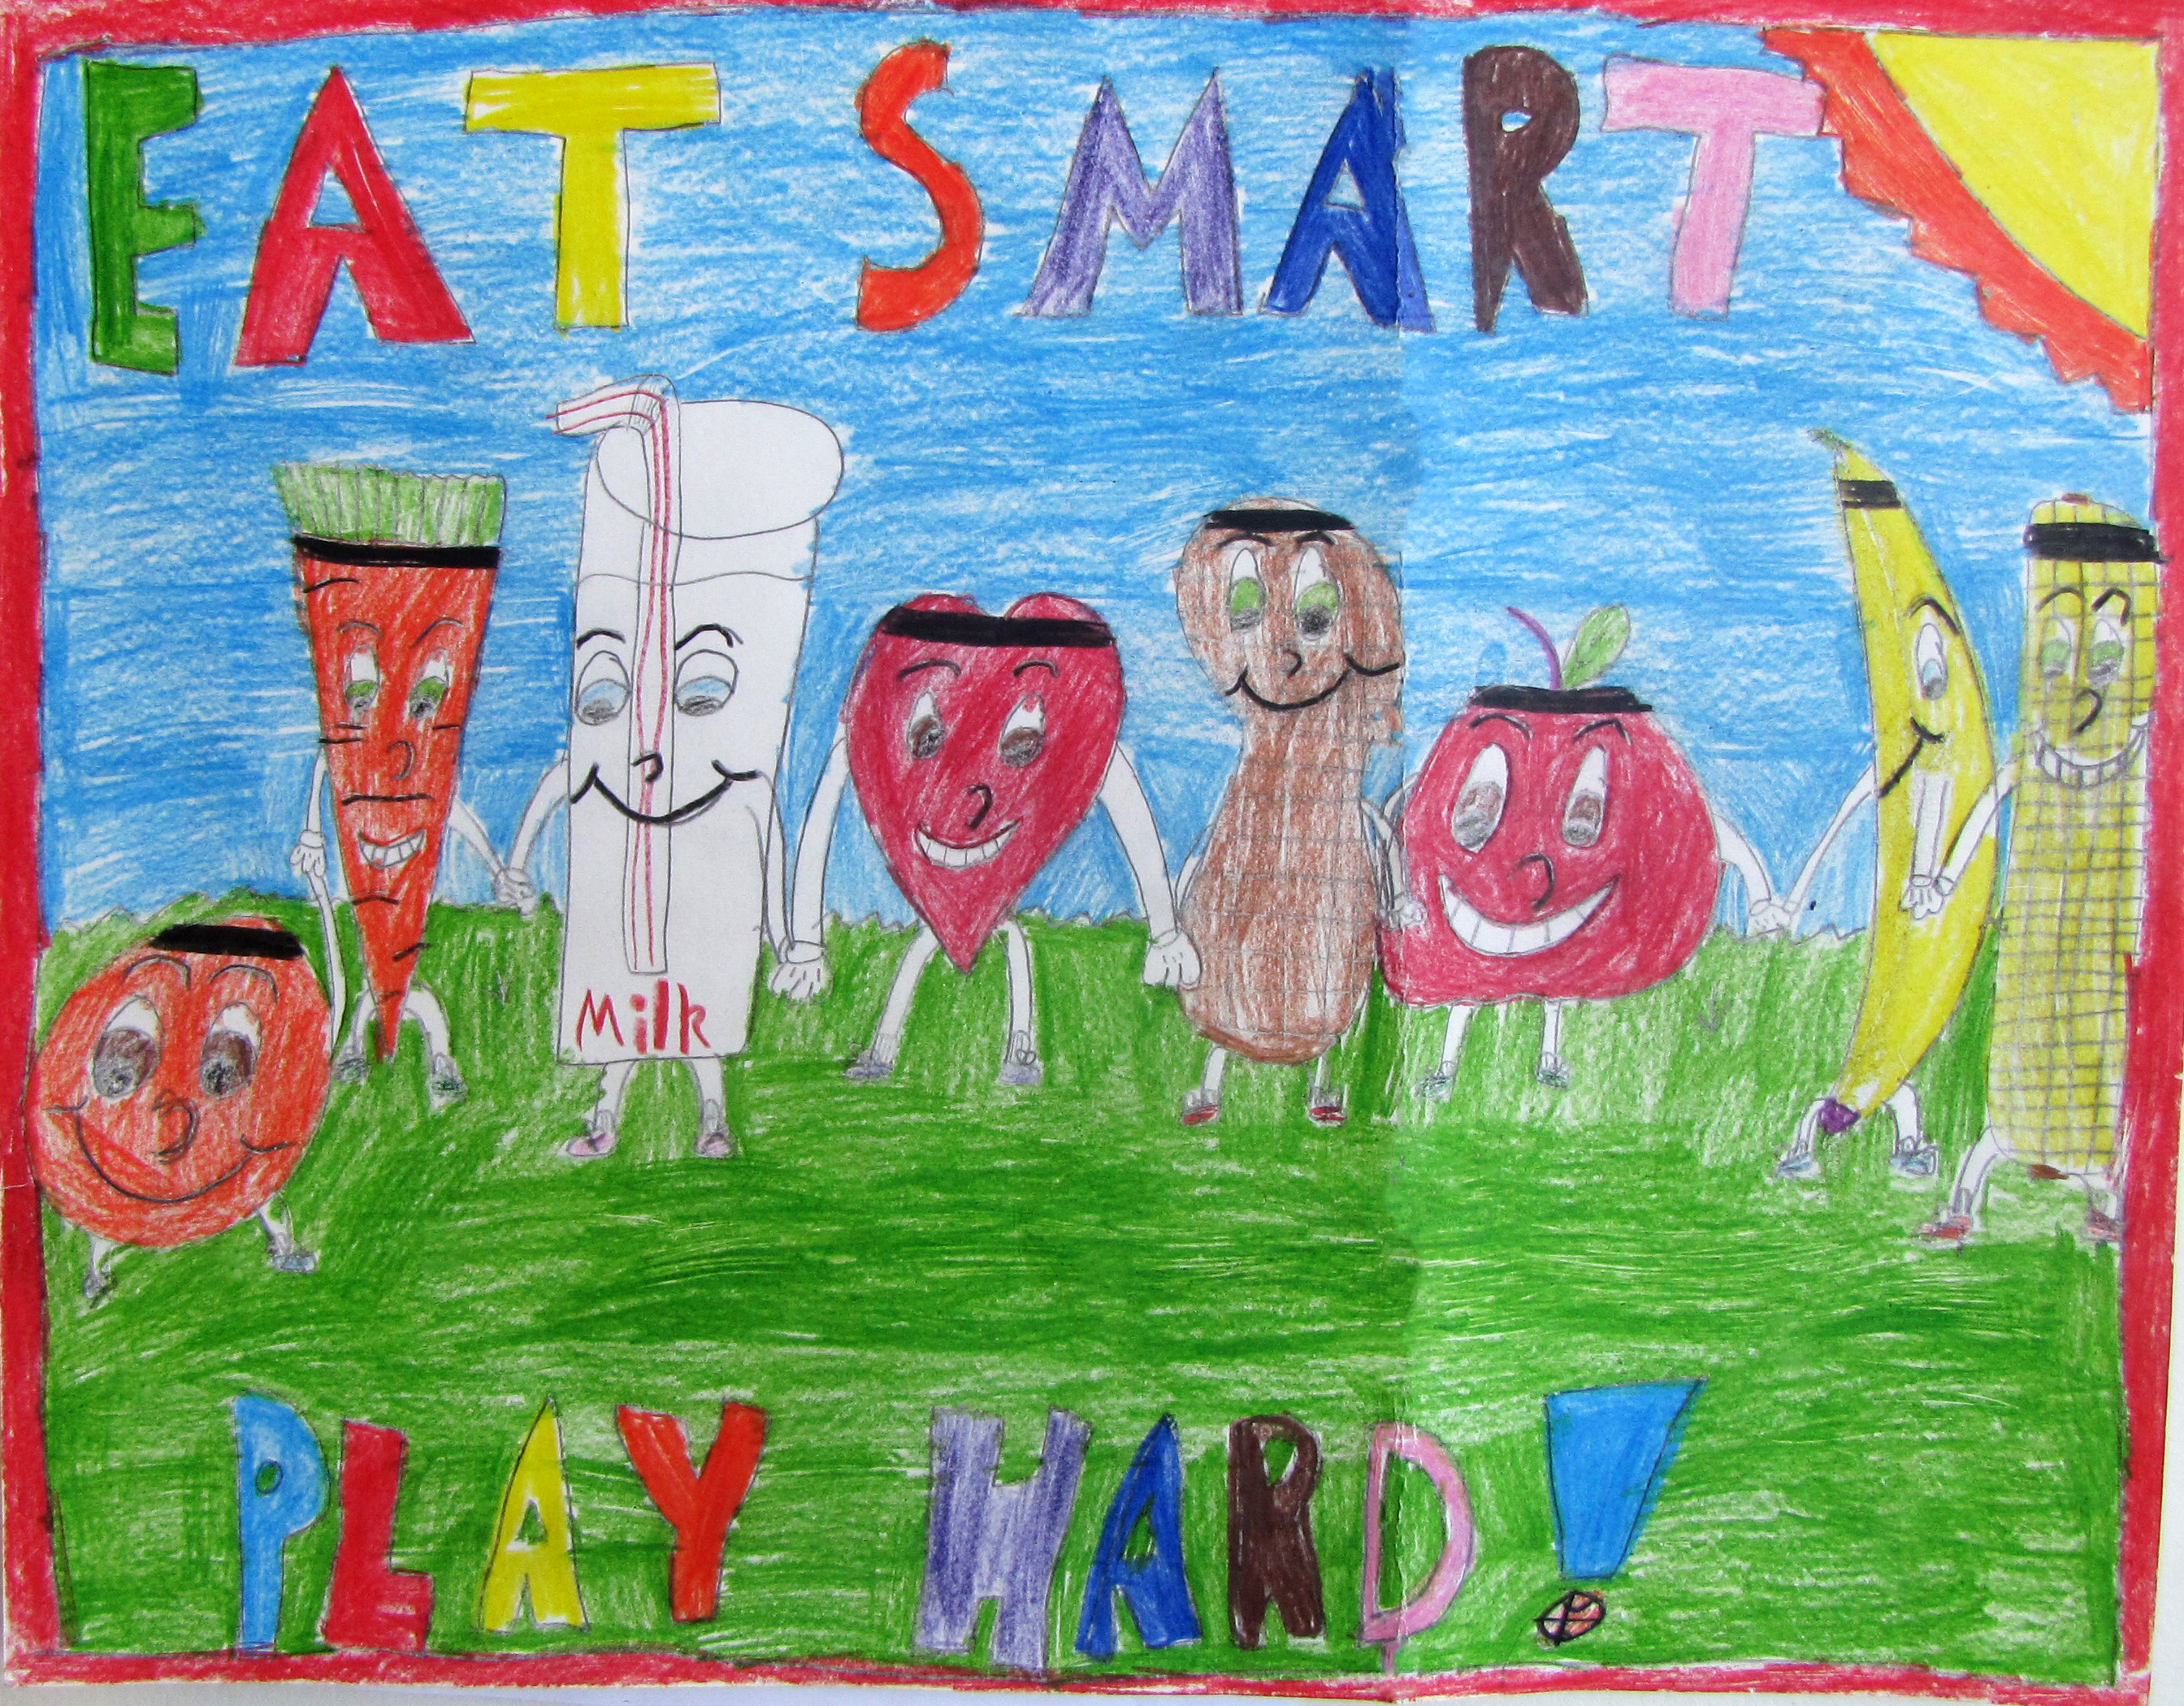 Caitlin Reiten of Kathryn receives third place in the preteen division of the 2014 ""Eat Smart. Play Hard."" poster contest with this poster.